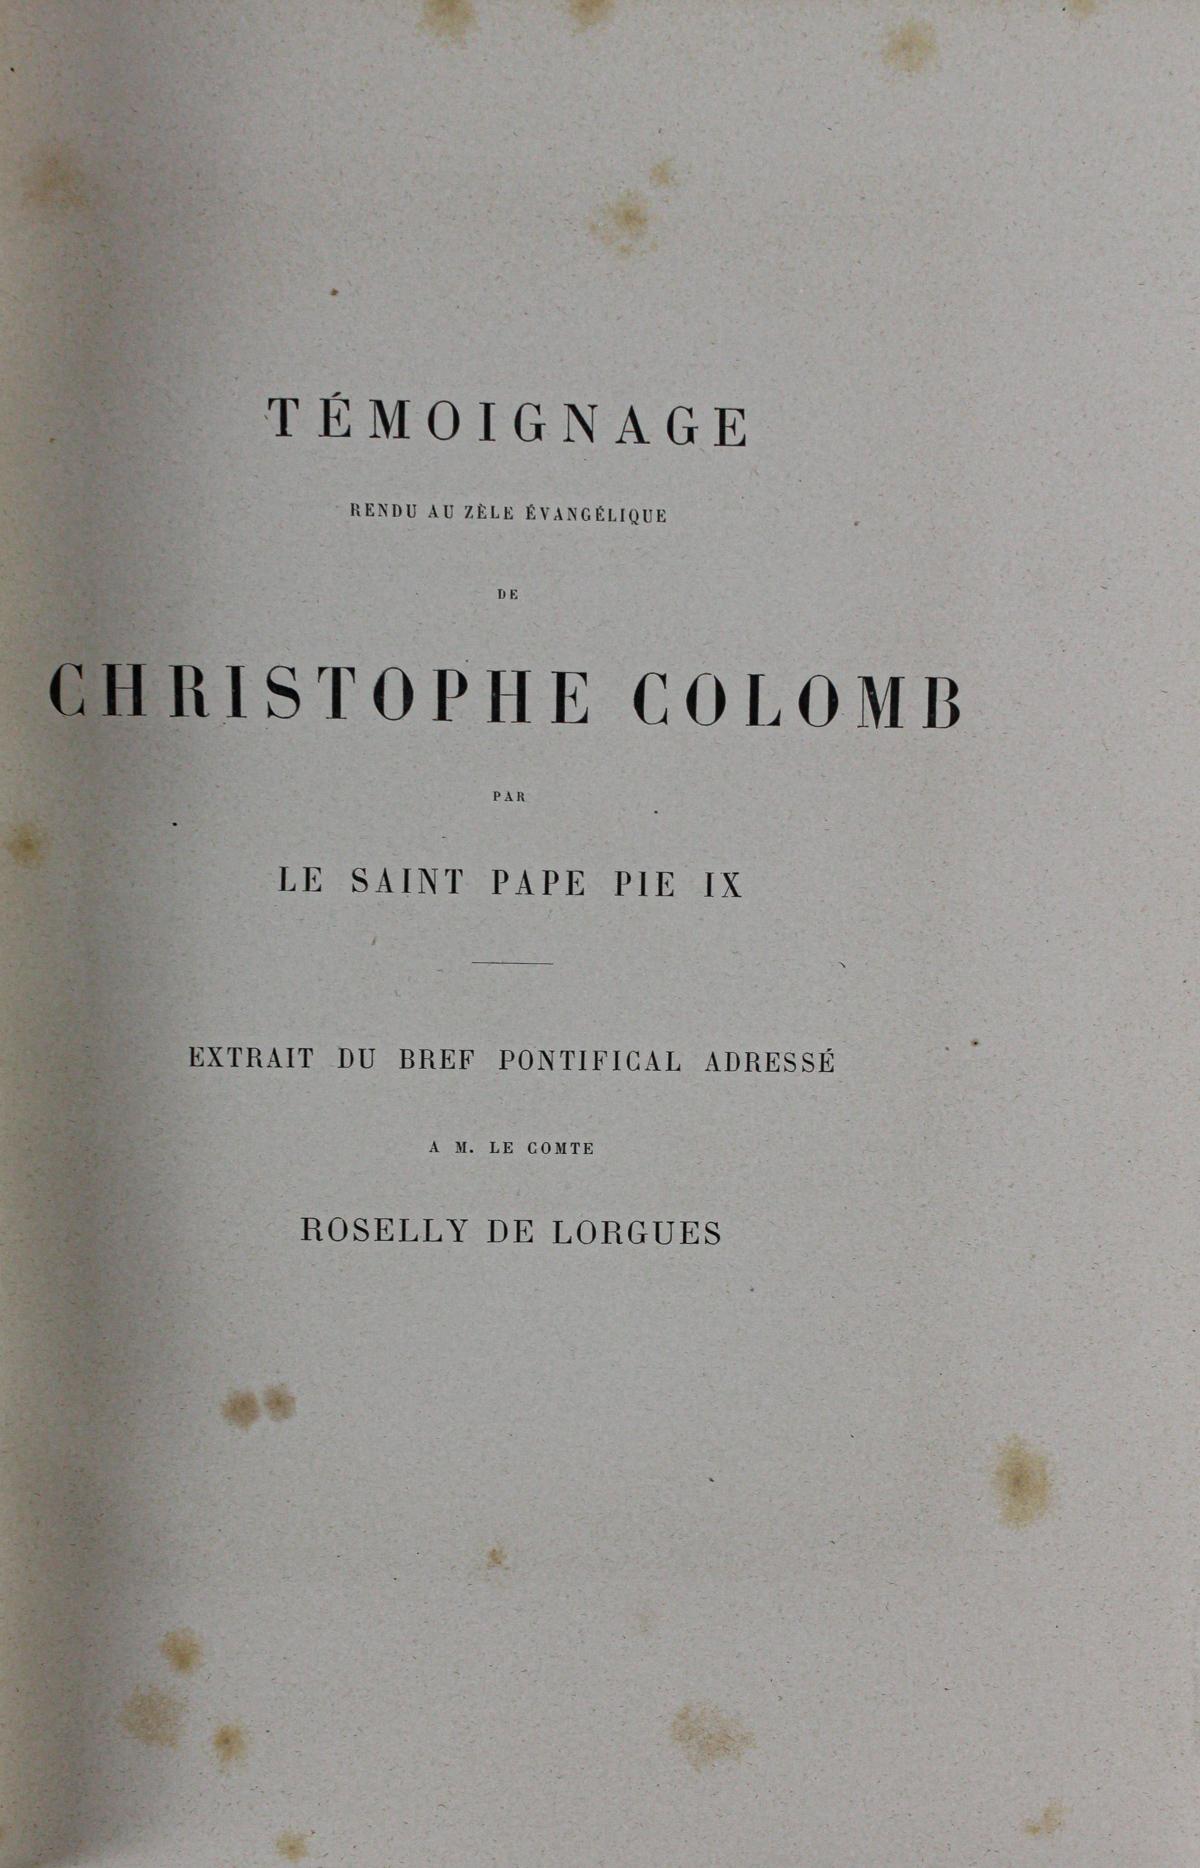 "CHRISTOFHE COLOMB"